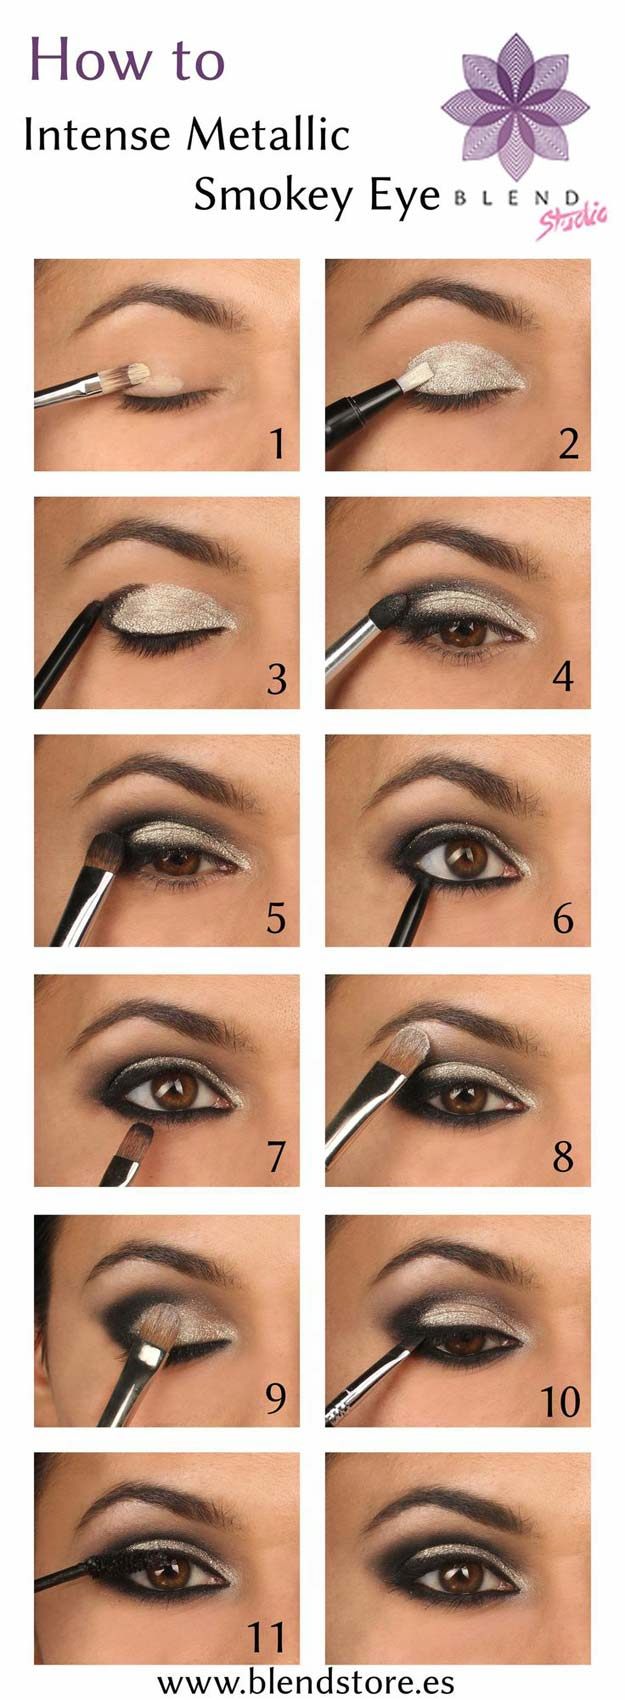 10 Lovable Prom Makeup Ideas For Hazel Eyes 38 makeup ideas for prom the goddess 2022